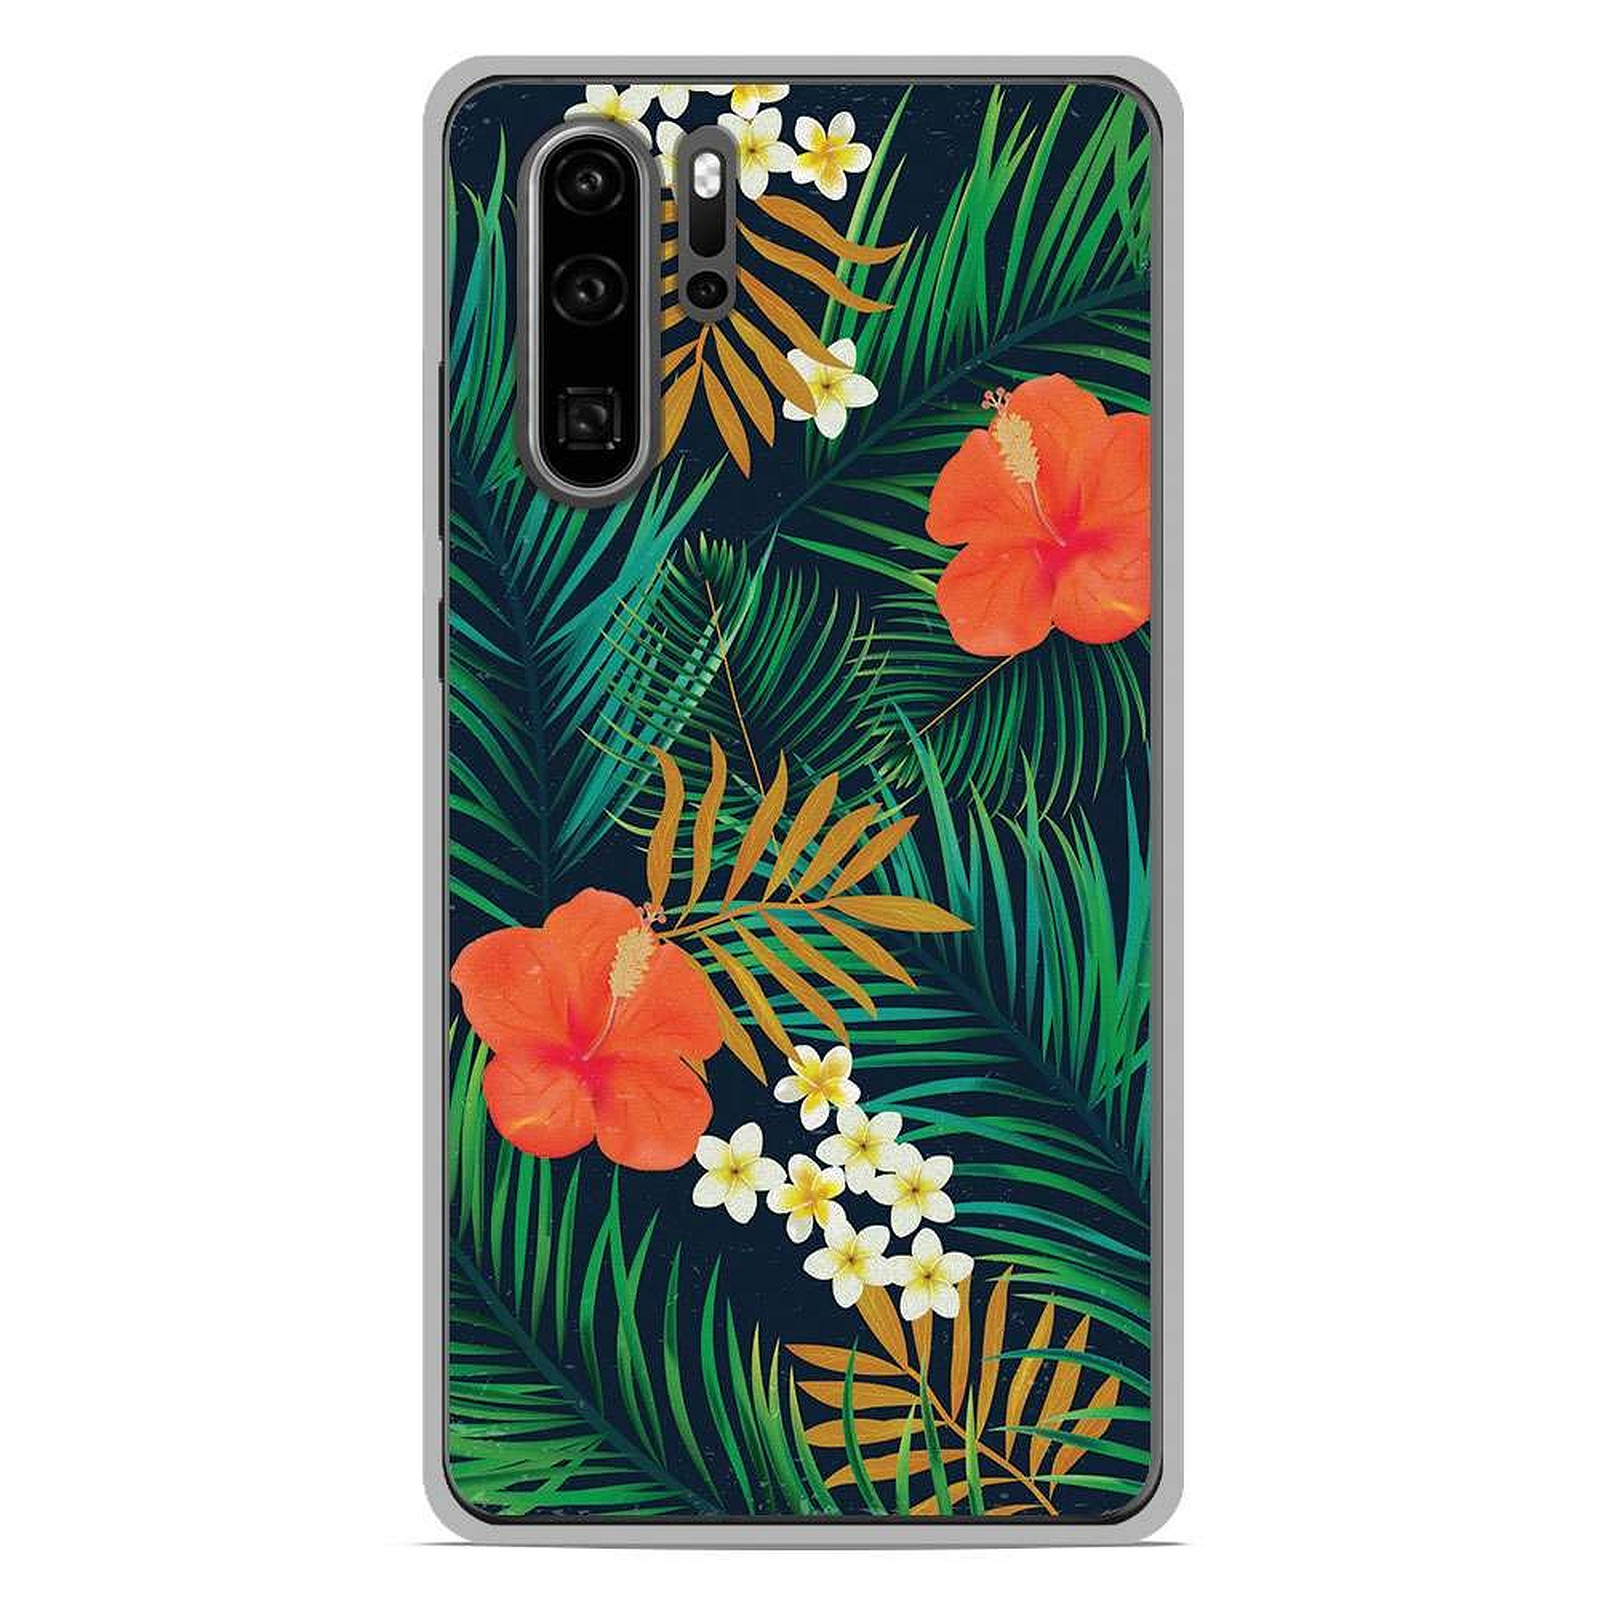 1001 Coques Coque silicone gel Huawei P30 Pro motif Tropical - Coque telephone 1001Coques